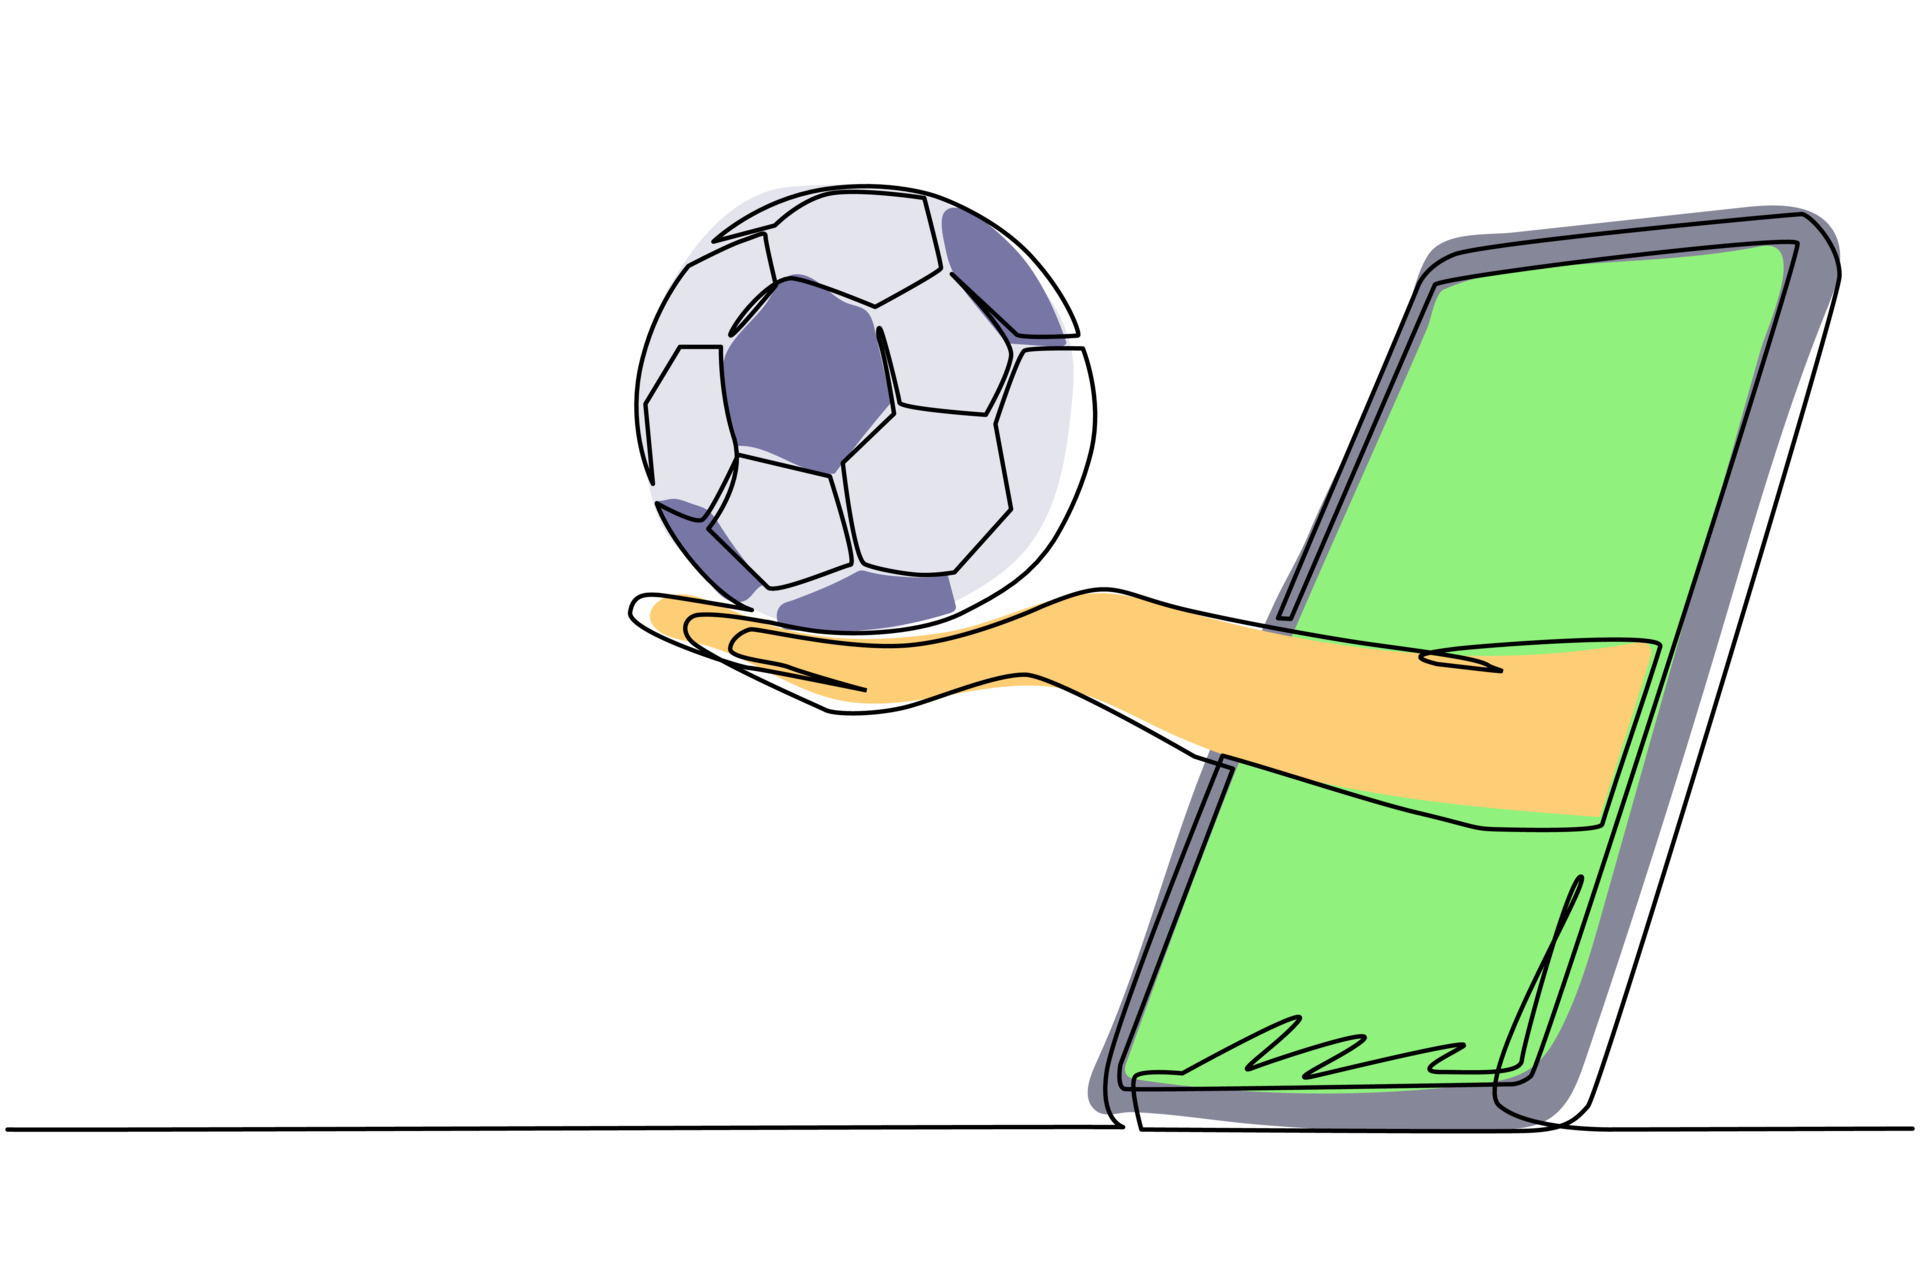 BALL GAMES ⚽ - Play Online Games!